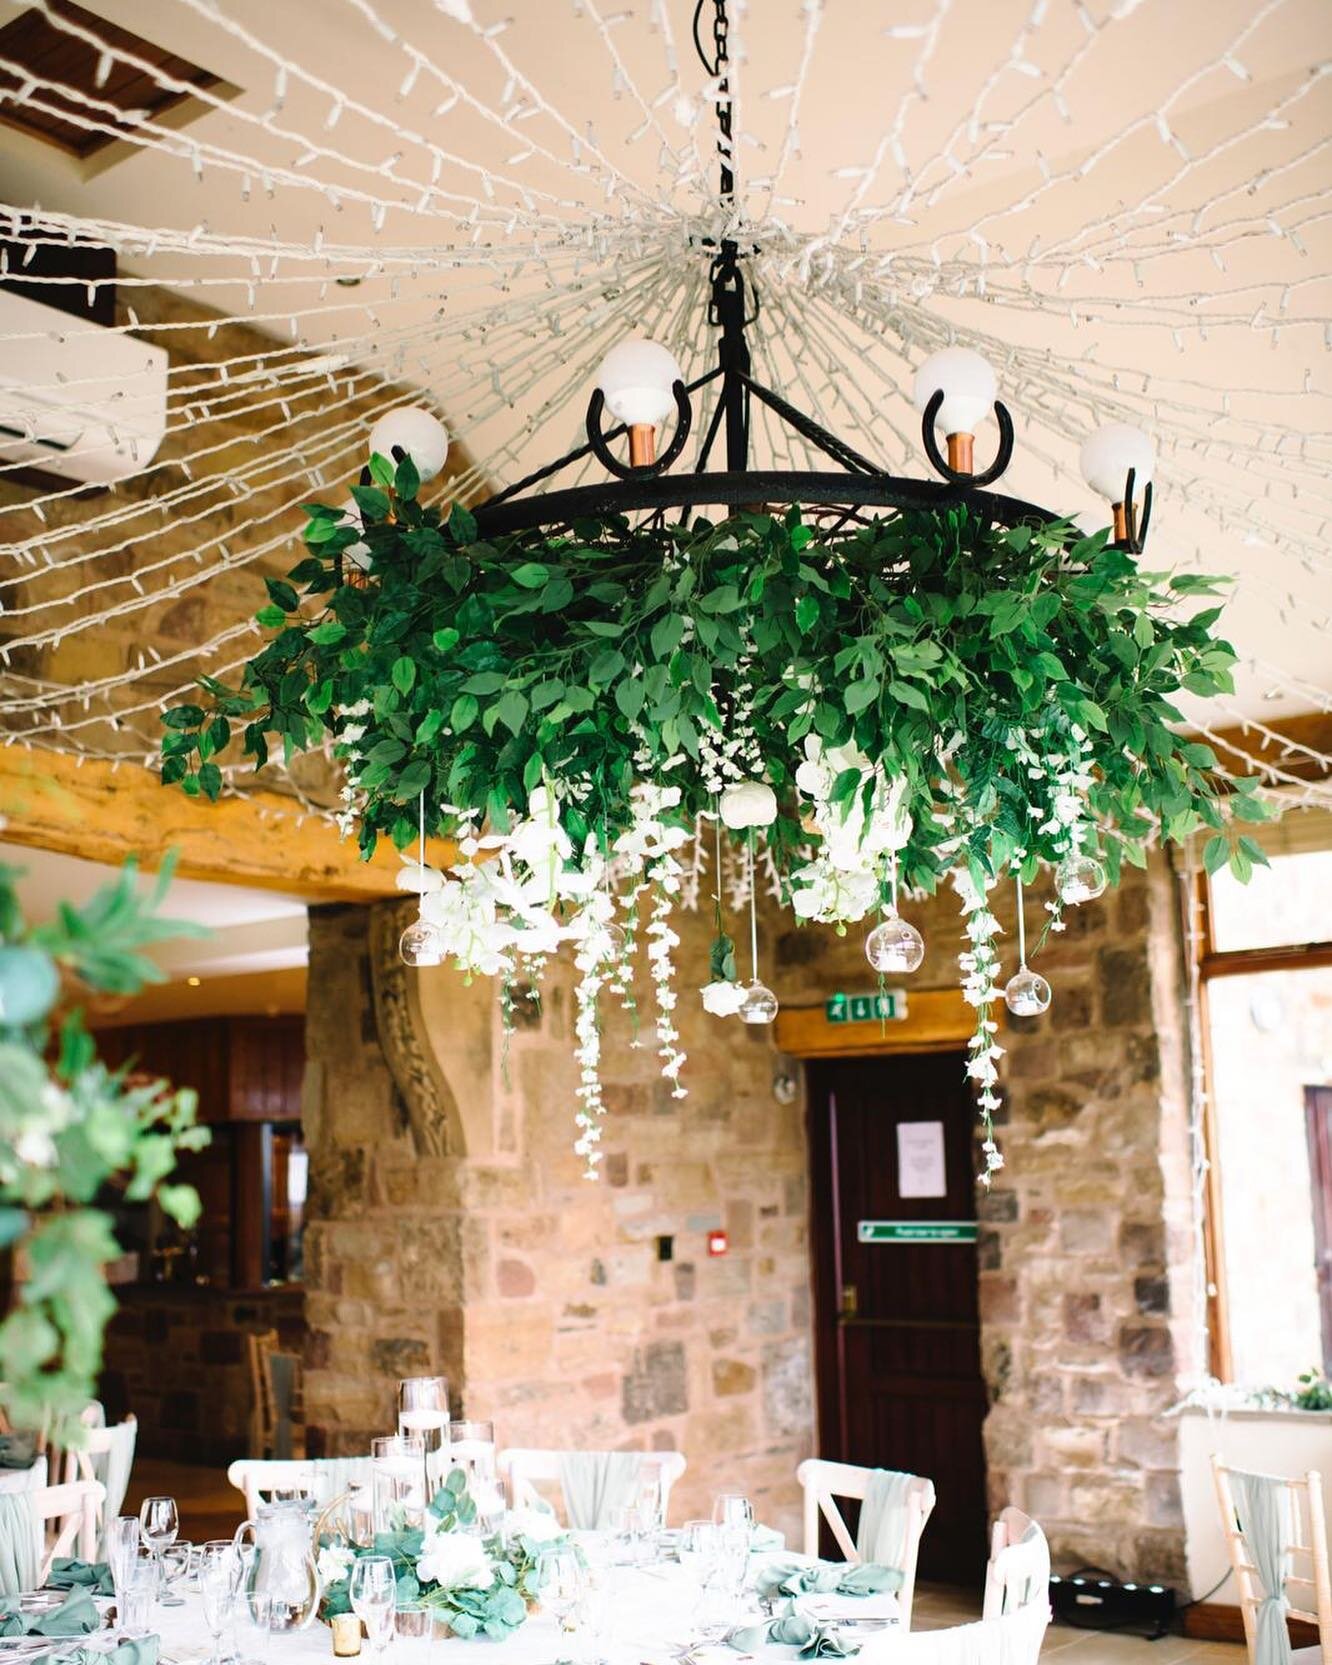 Our black chandeliers are dotted around the venue, hand made by grandad in his workshop ✨ you can hang greenery from these, or even pom-poms made of tissue paper! ✨✨✨